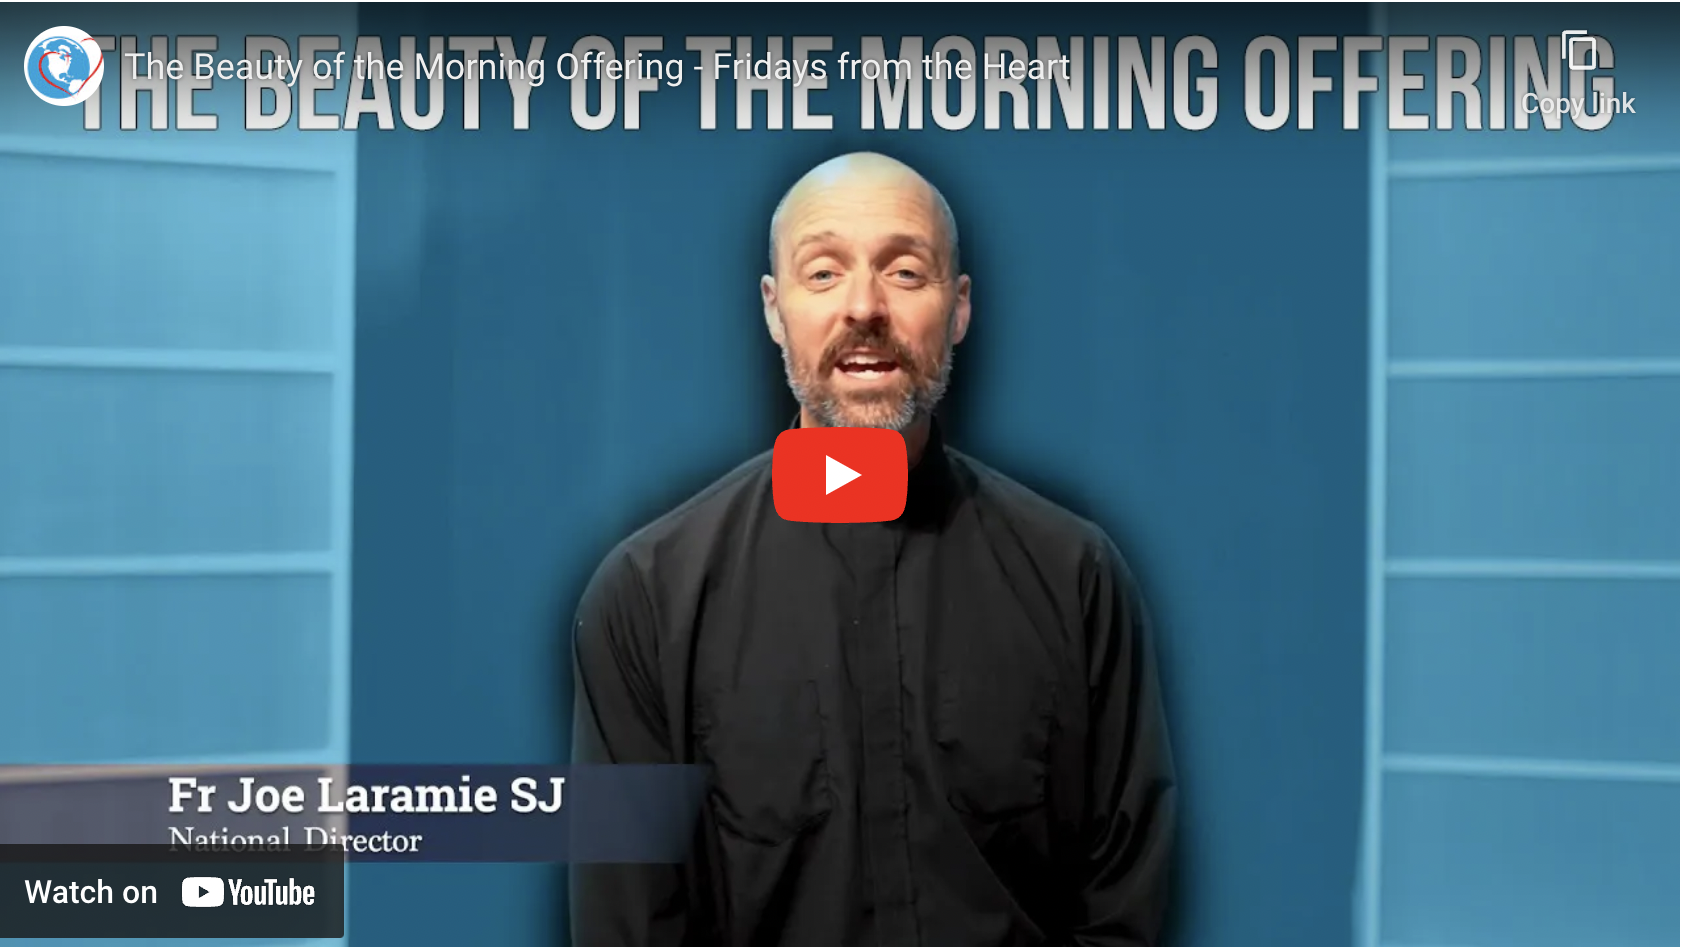 The Beauty of the Morning Offering